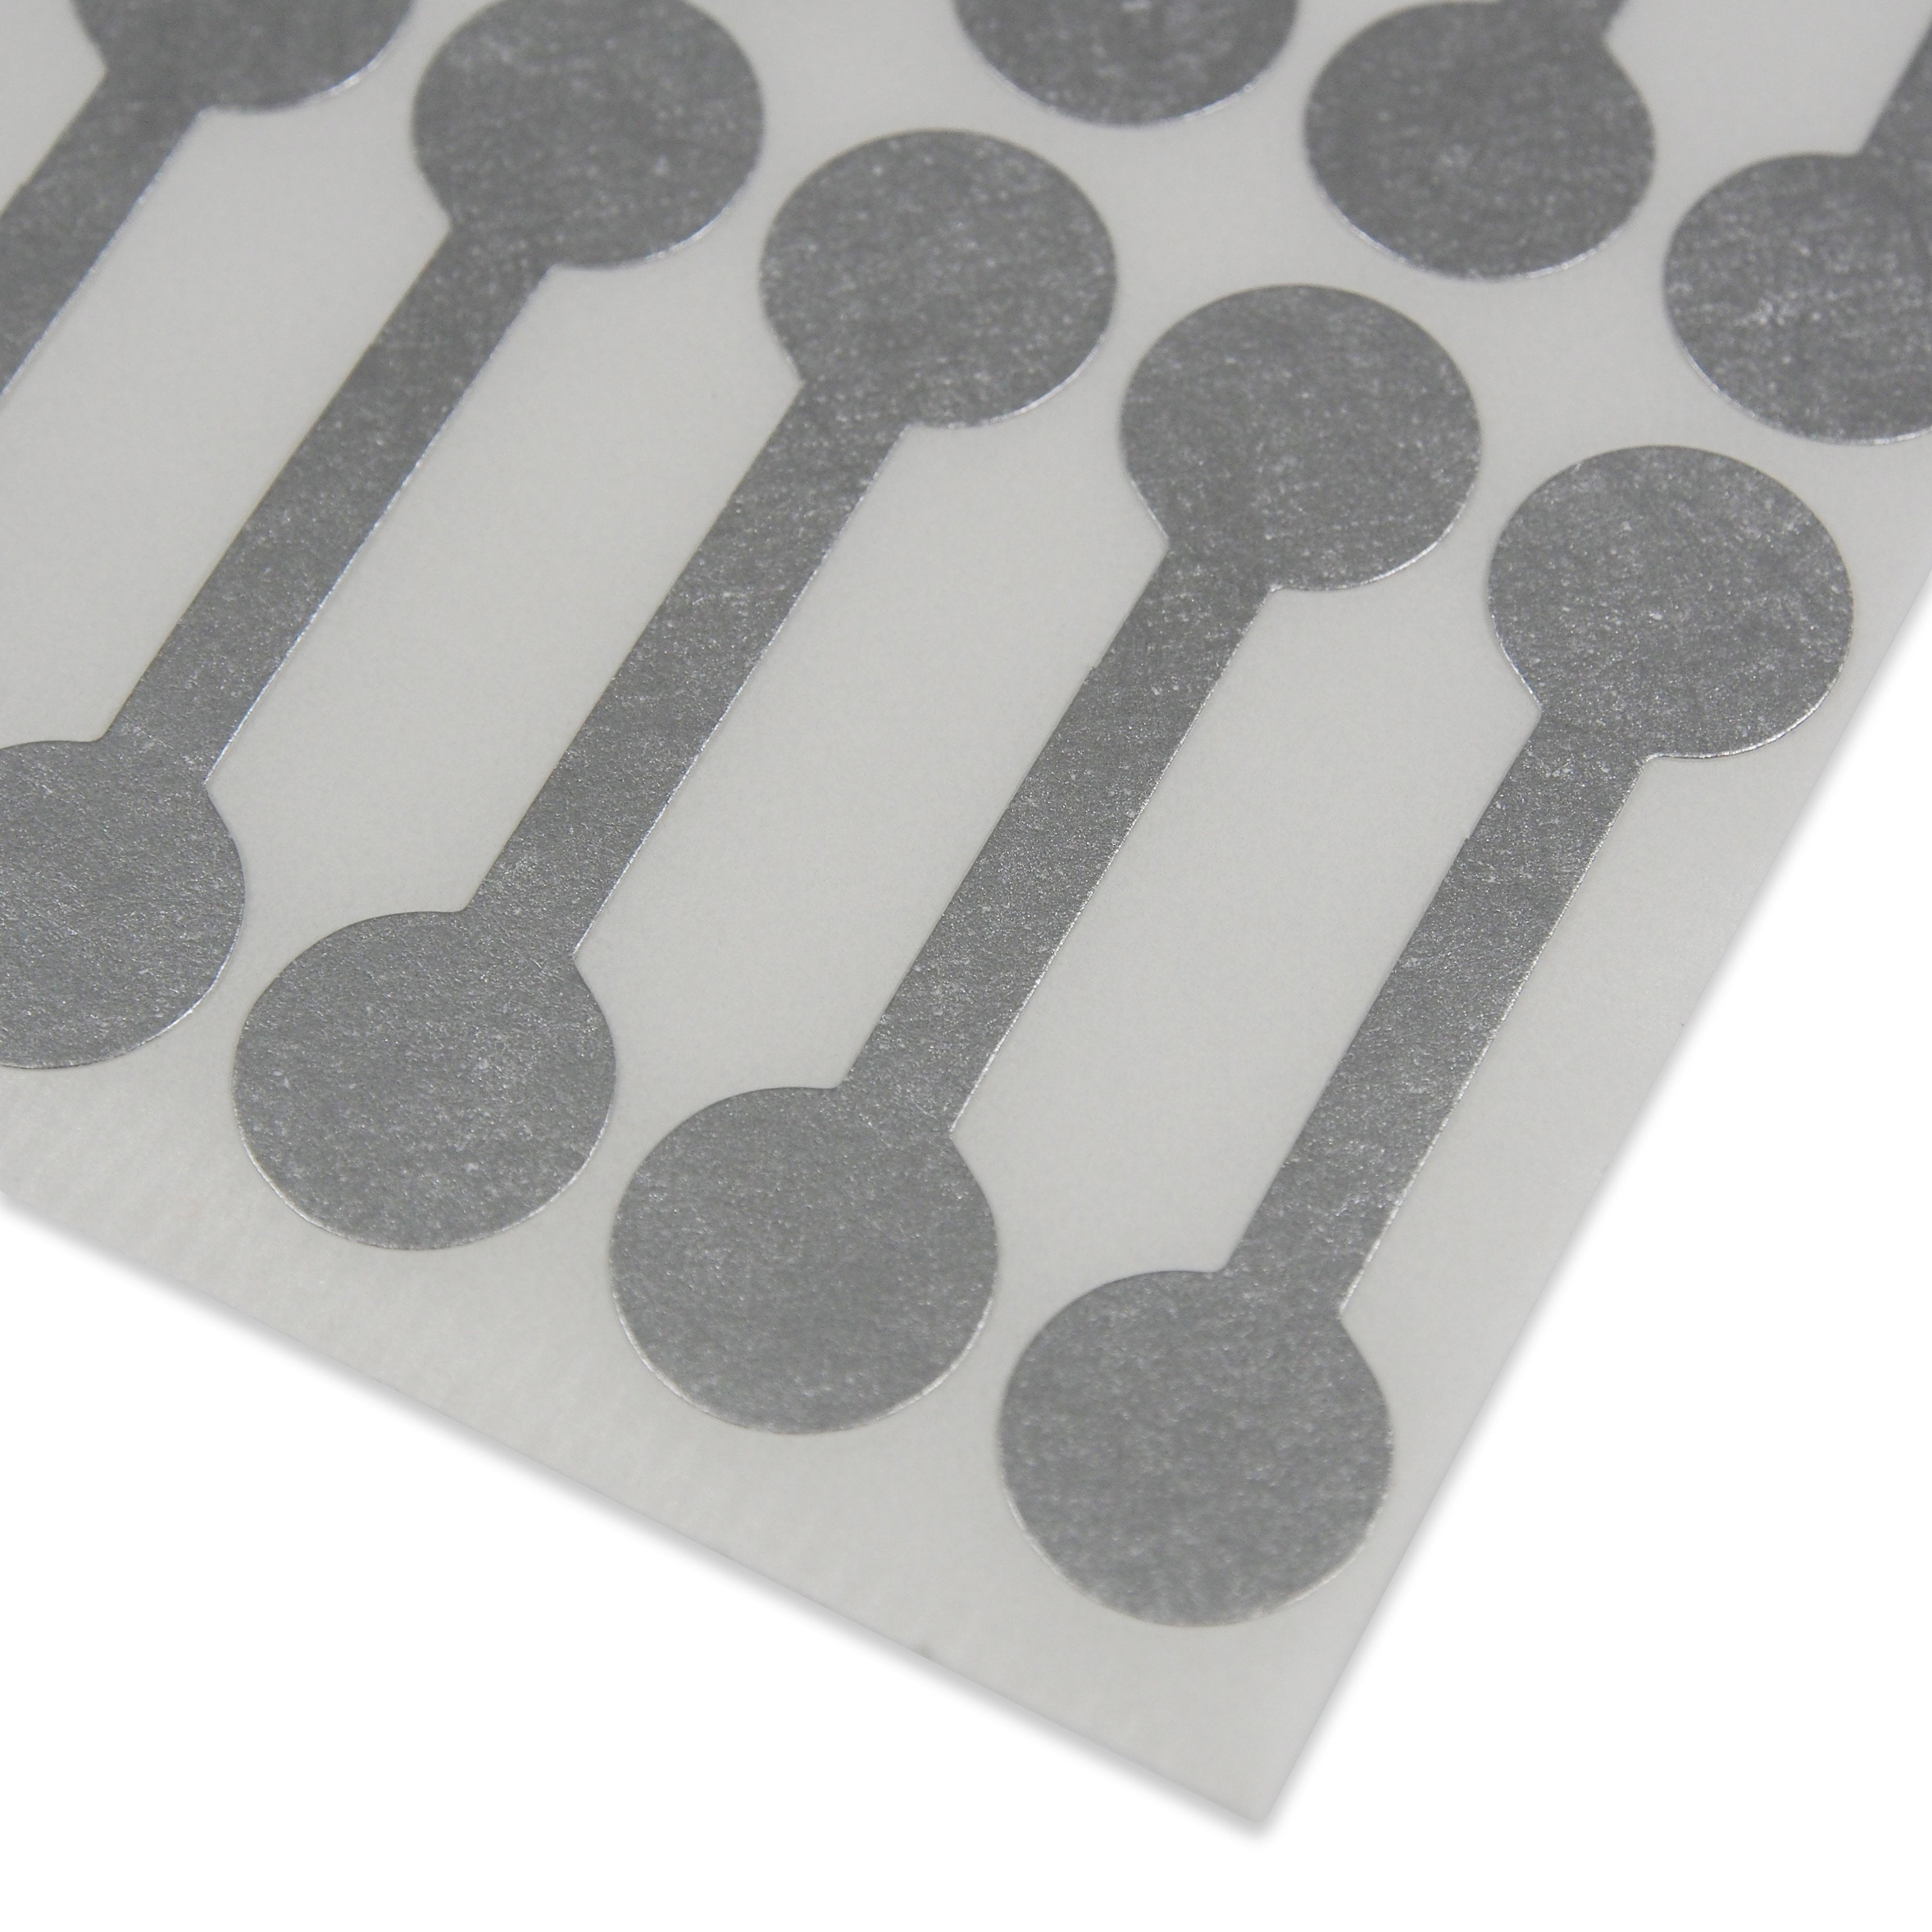  Jewelry Price Tags Silver Blank Jewelry Stickers Jewelry  Repair Price and Indentification Tags,0.47X1.73 inch Barbell Jewelry Tags  Merchandise Price Labels(1000Pcs) : Office Products